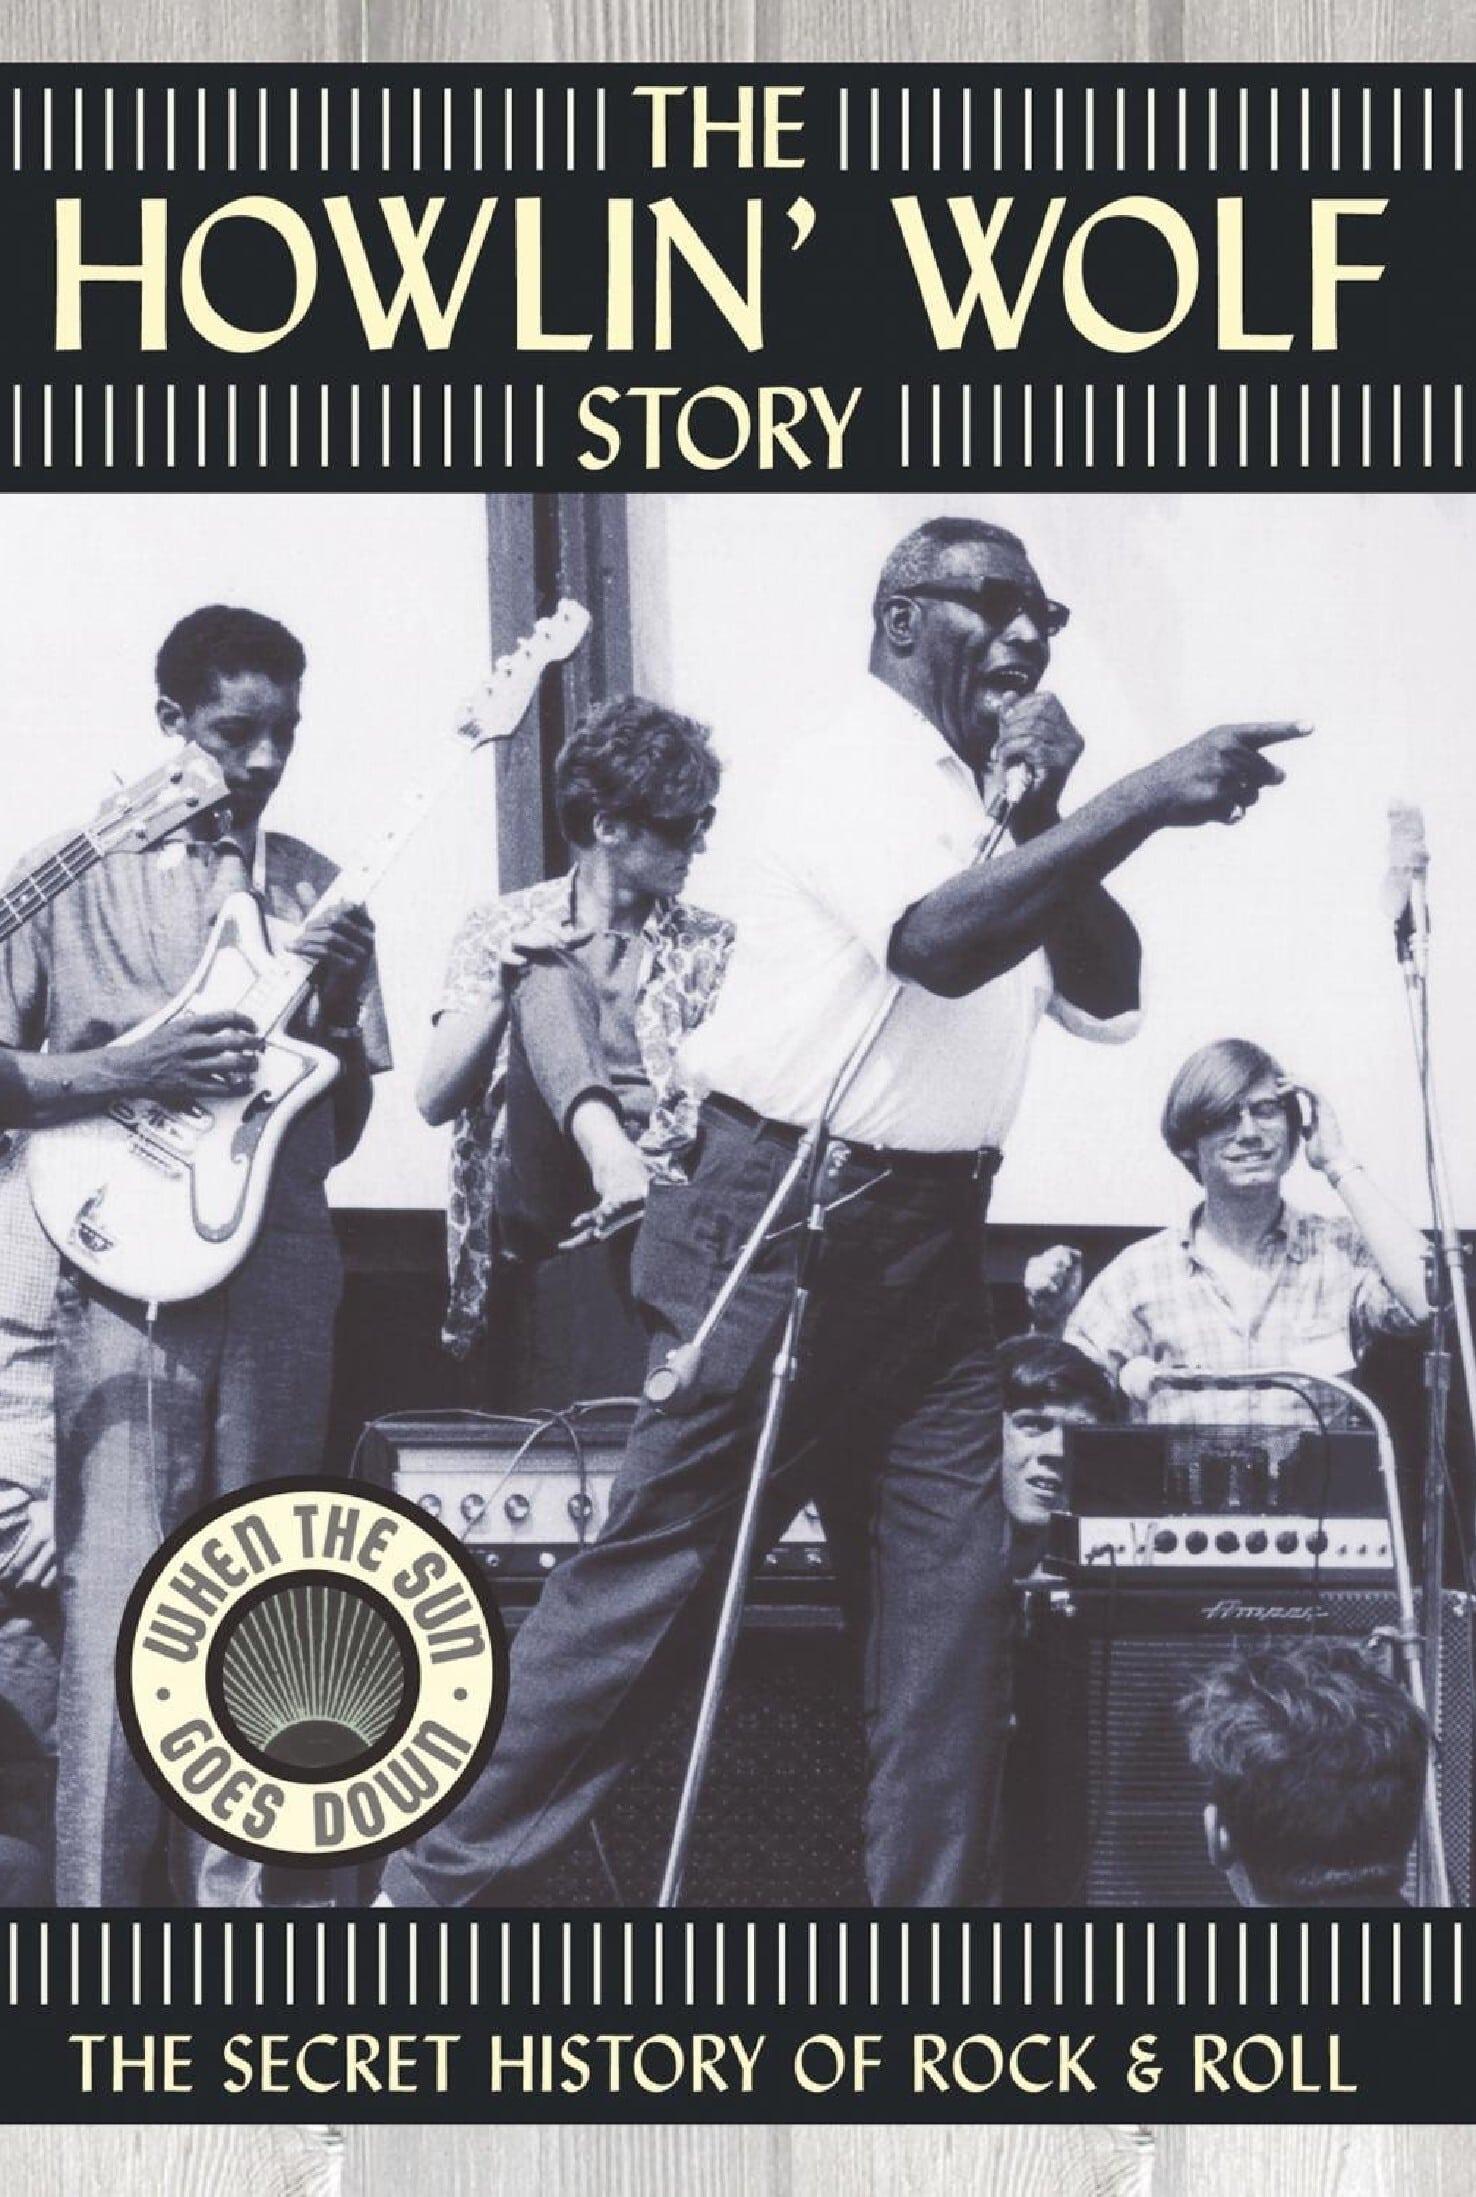 The Howlin' Wolf Story: The Secret History of Rock & Roll poster